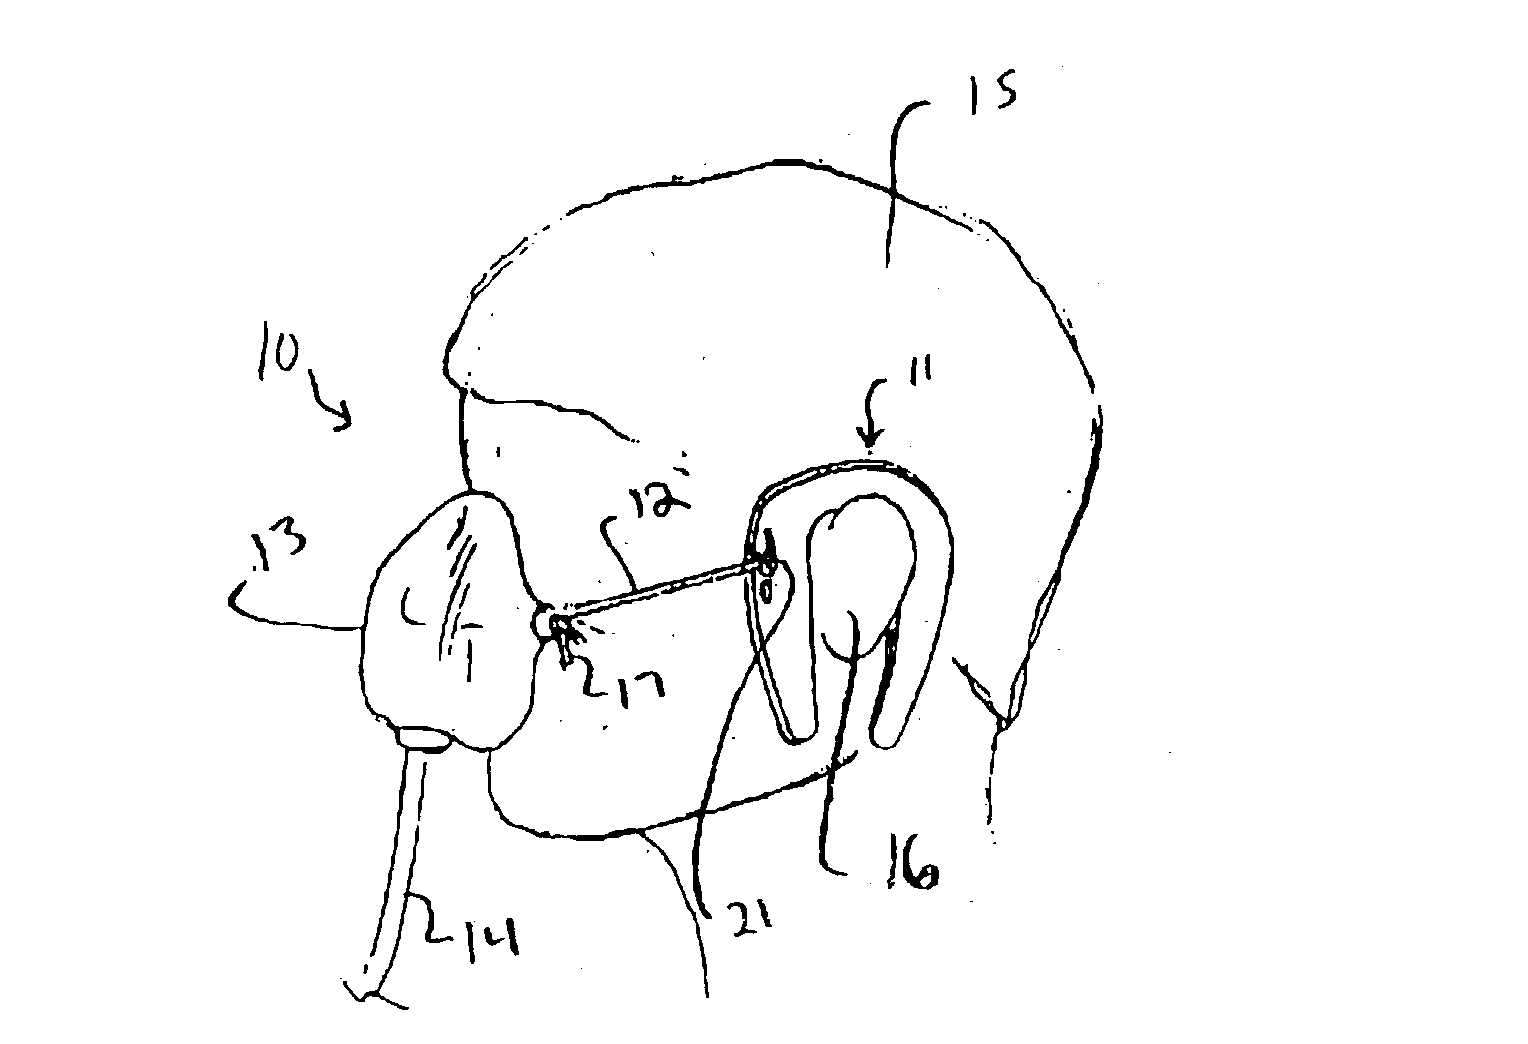 Oxygen mask retention device and method for retaining an oxygen mask